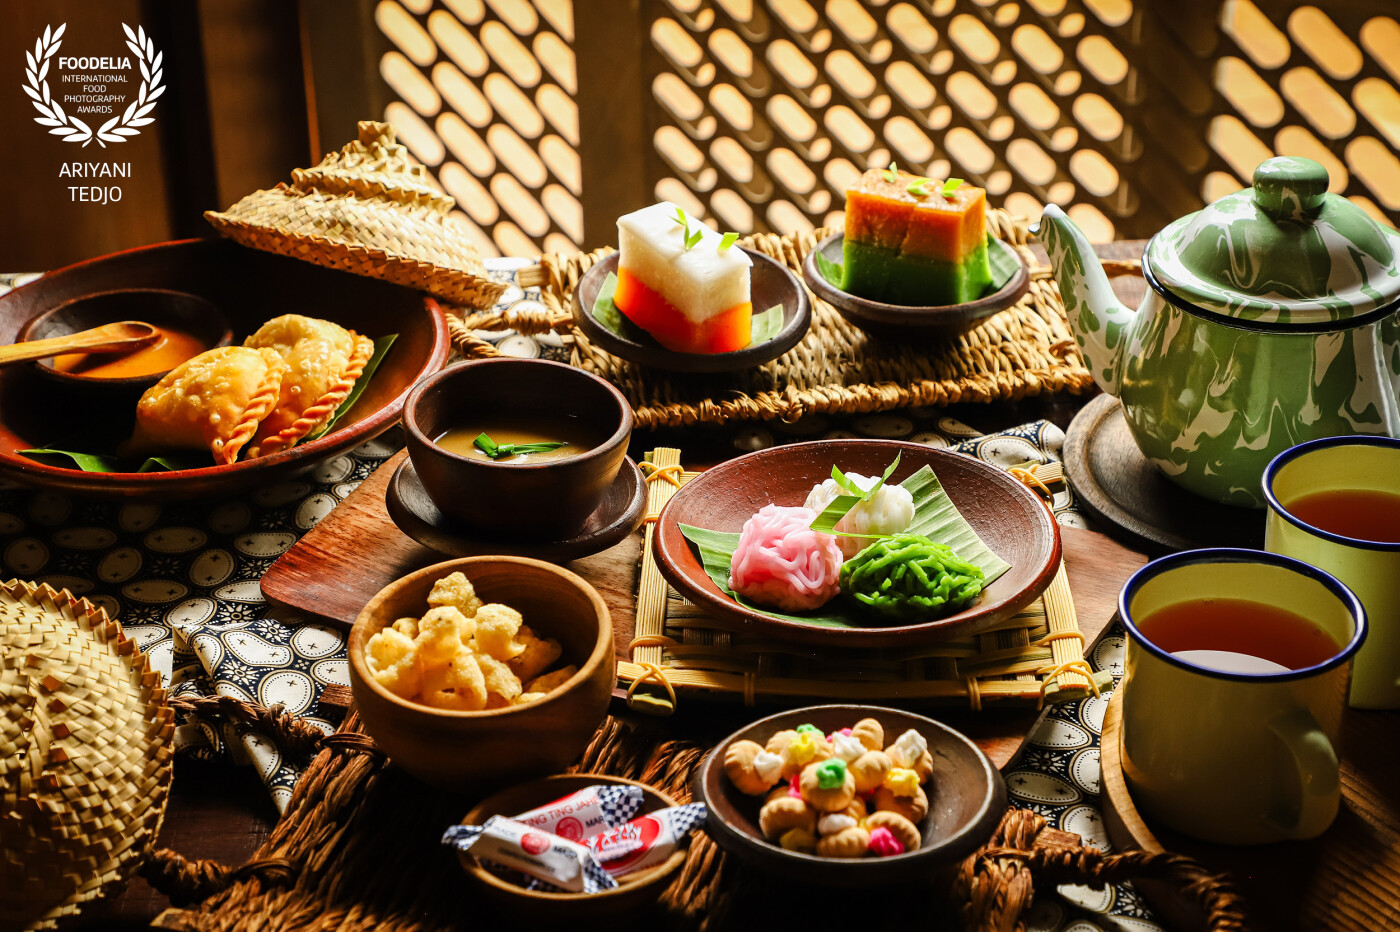 Traditional afternoon tea. Portraying popular lndonesian snacks served for an afternoon tea here in Jakarta, served on earthenware crockeries and Javanese enamel tea set.